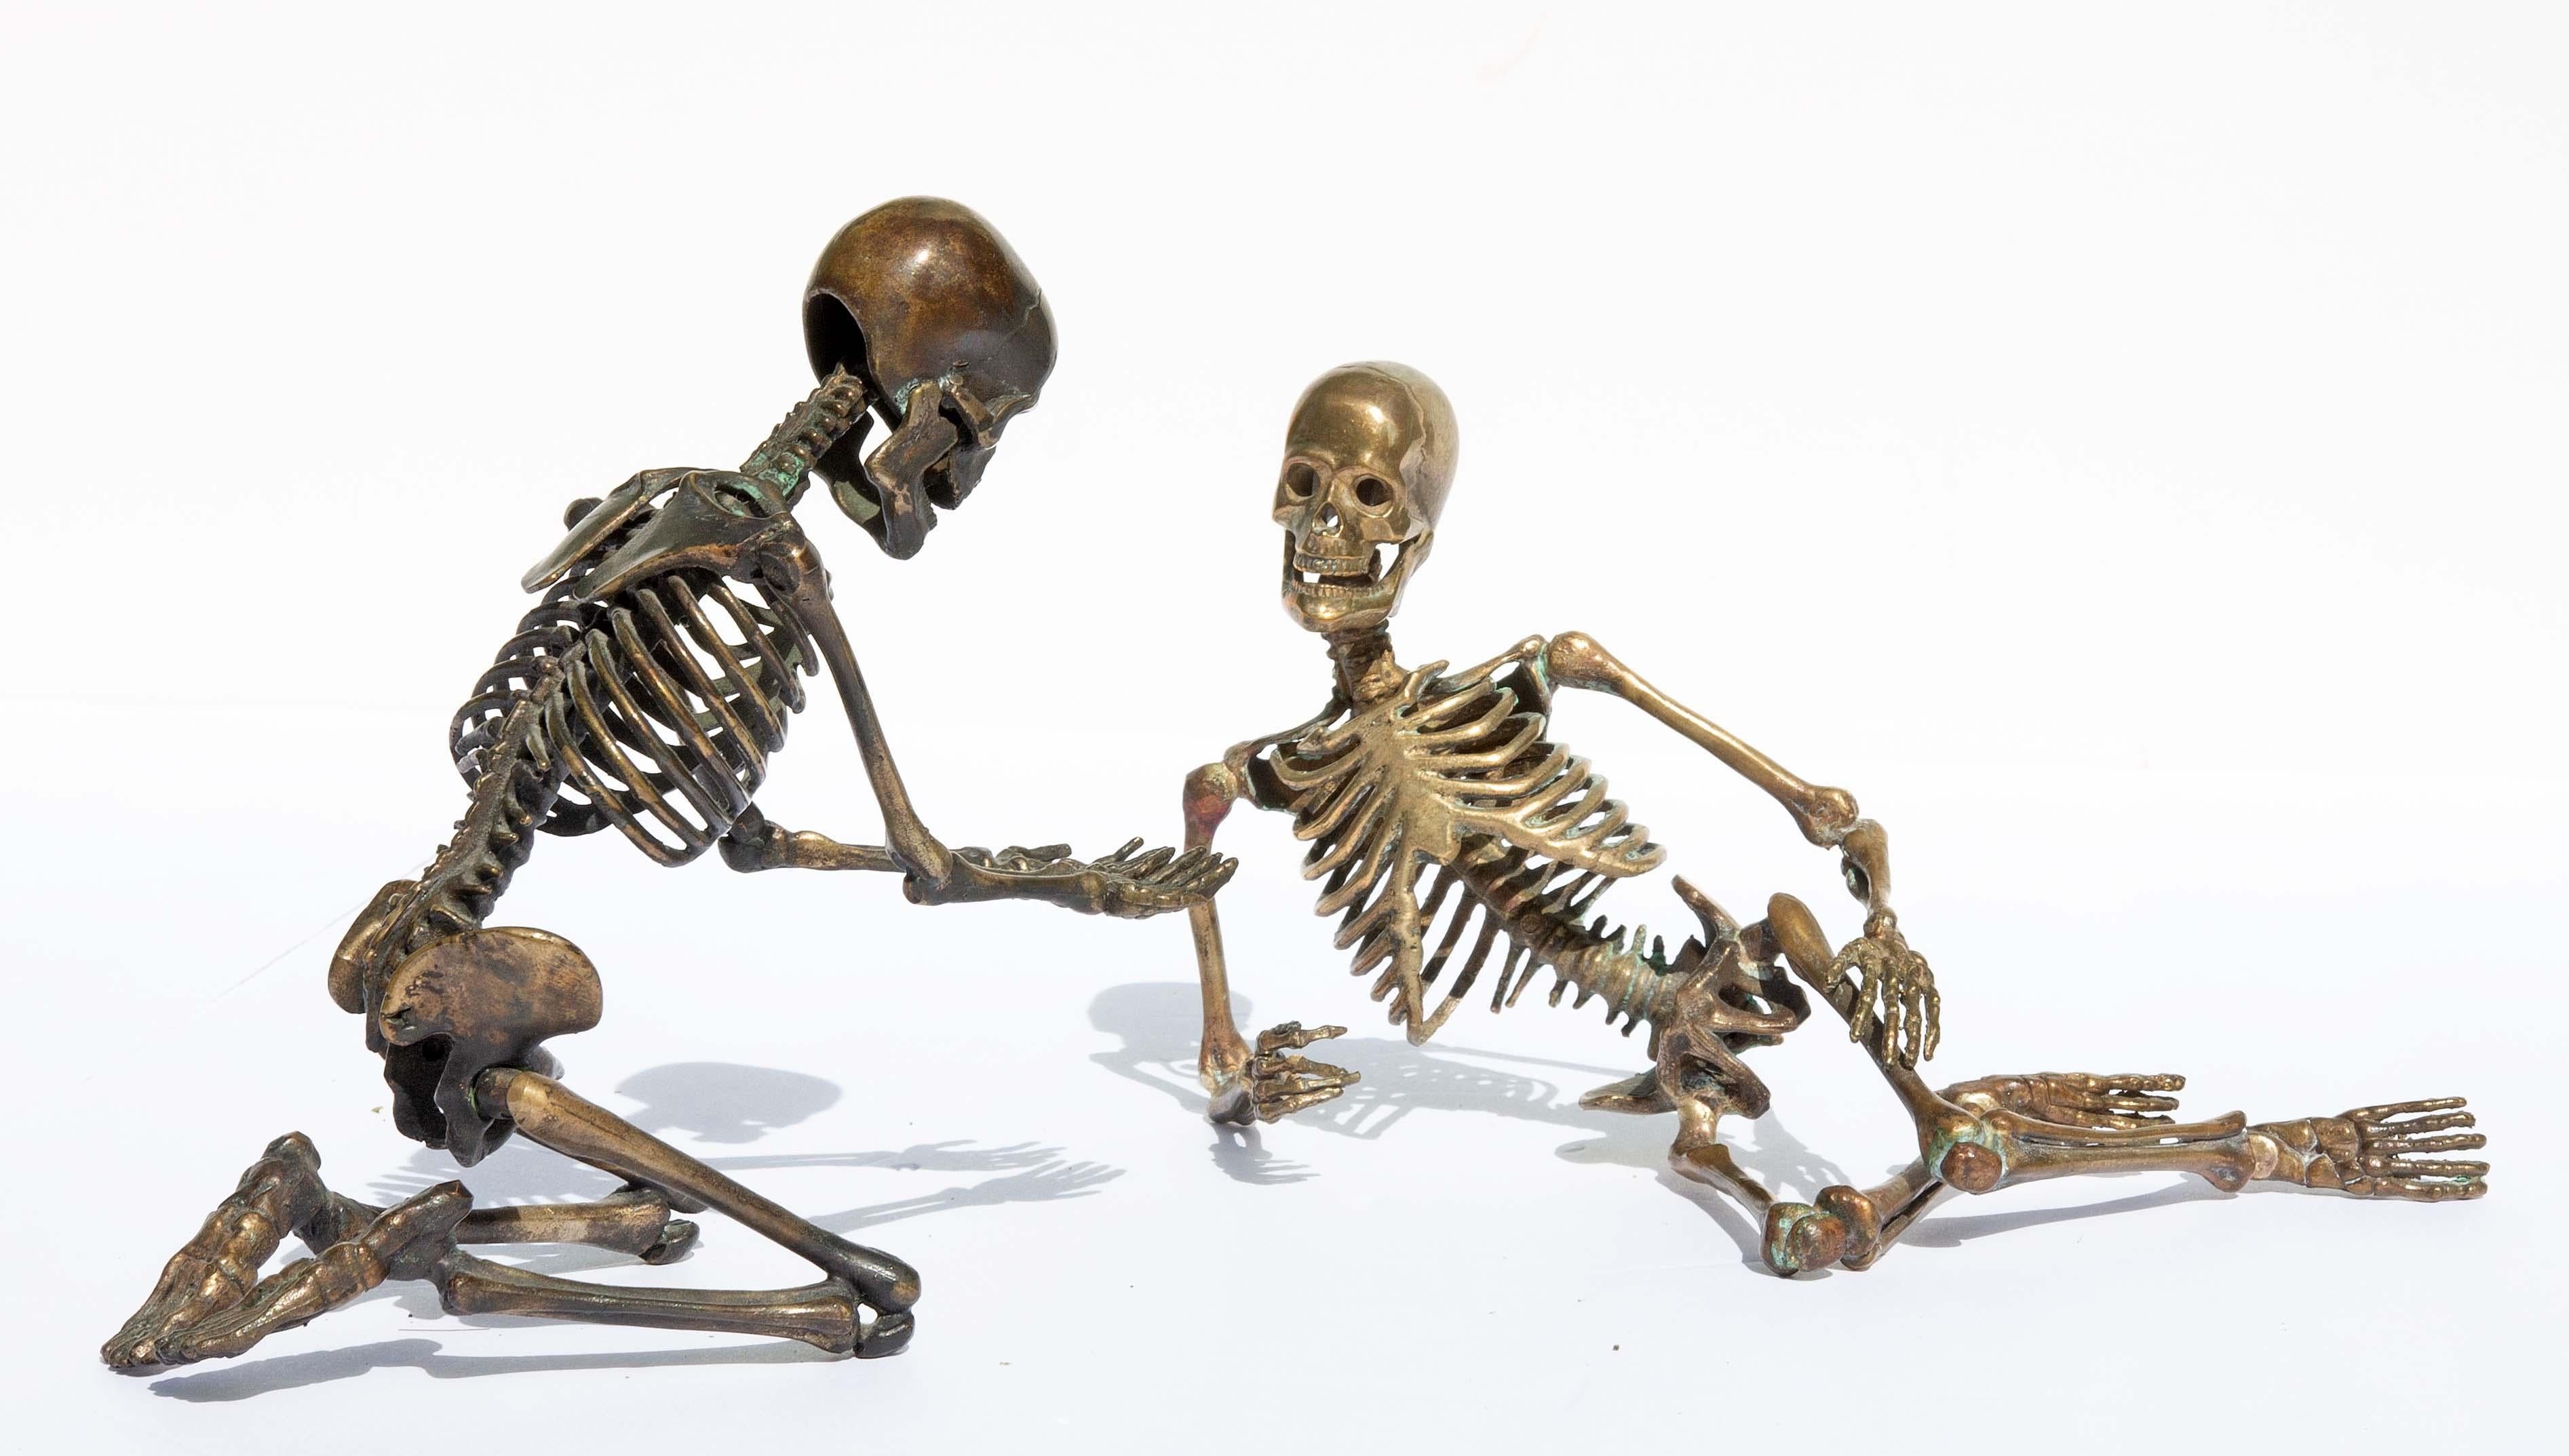 Group of bronze skeleton sculptures having a passionate conversation. Very detailed. The kneeling figure has working jaw. By American sculptor David W. Dempsey. Monogramed 